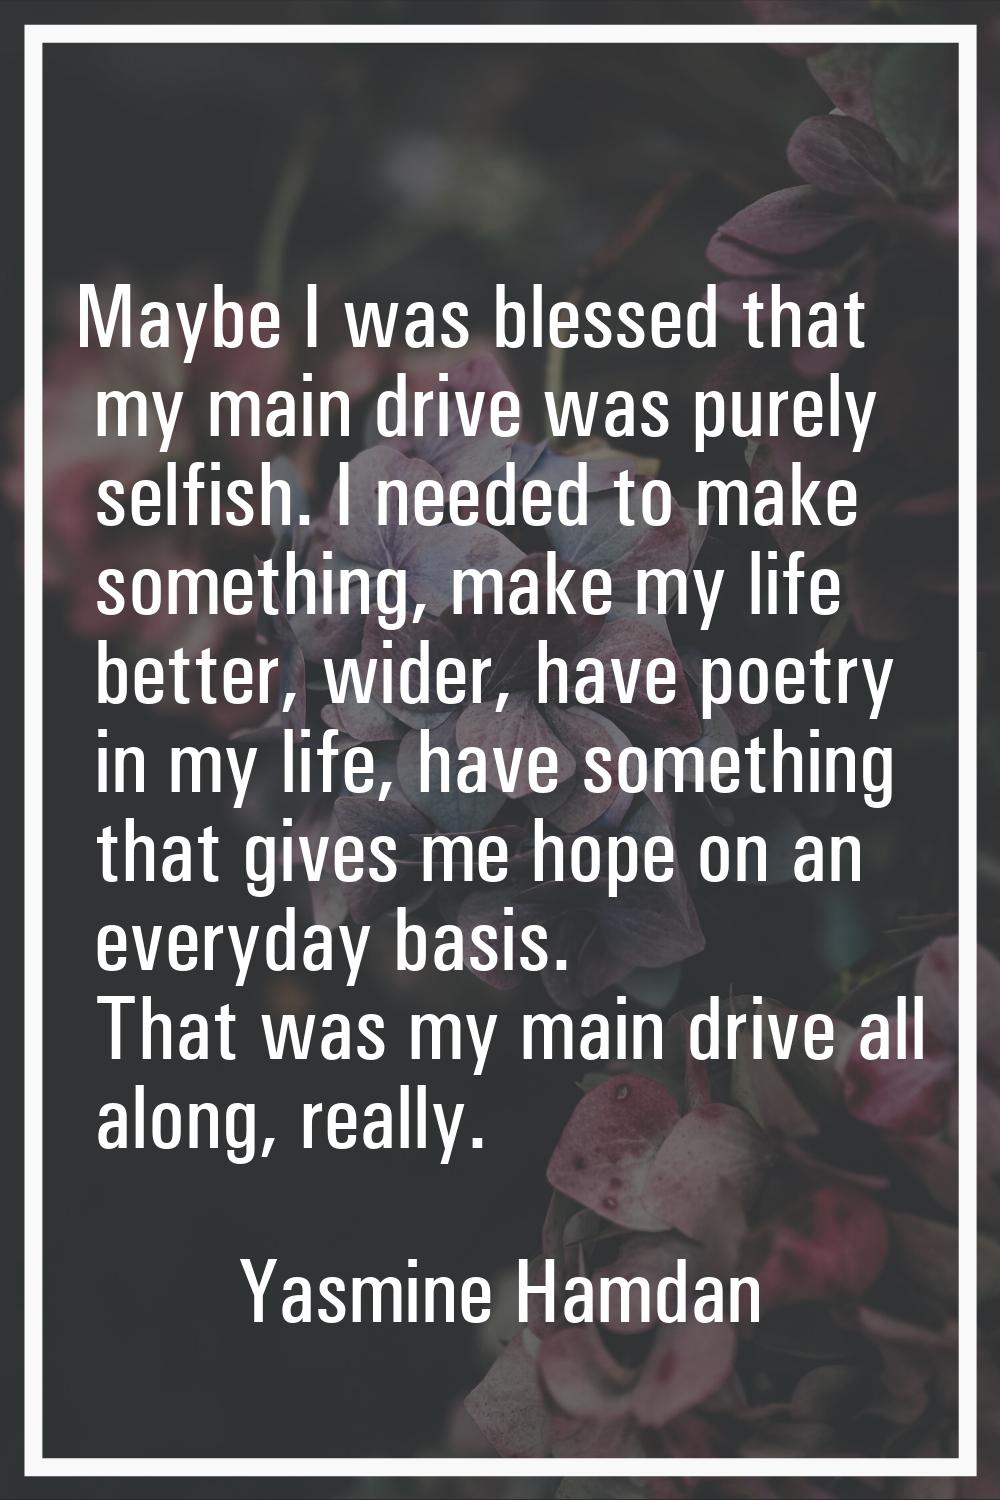 Maybe I was blessed that my main drive was purely selfish. I needed to make something, make my life